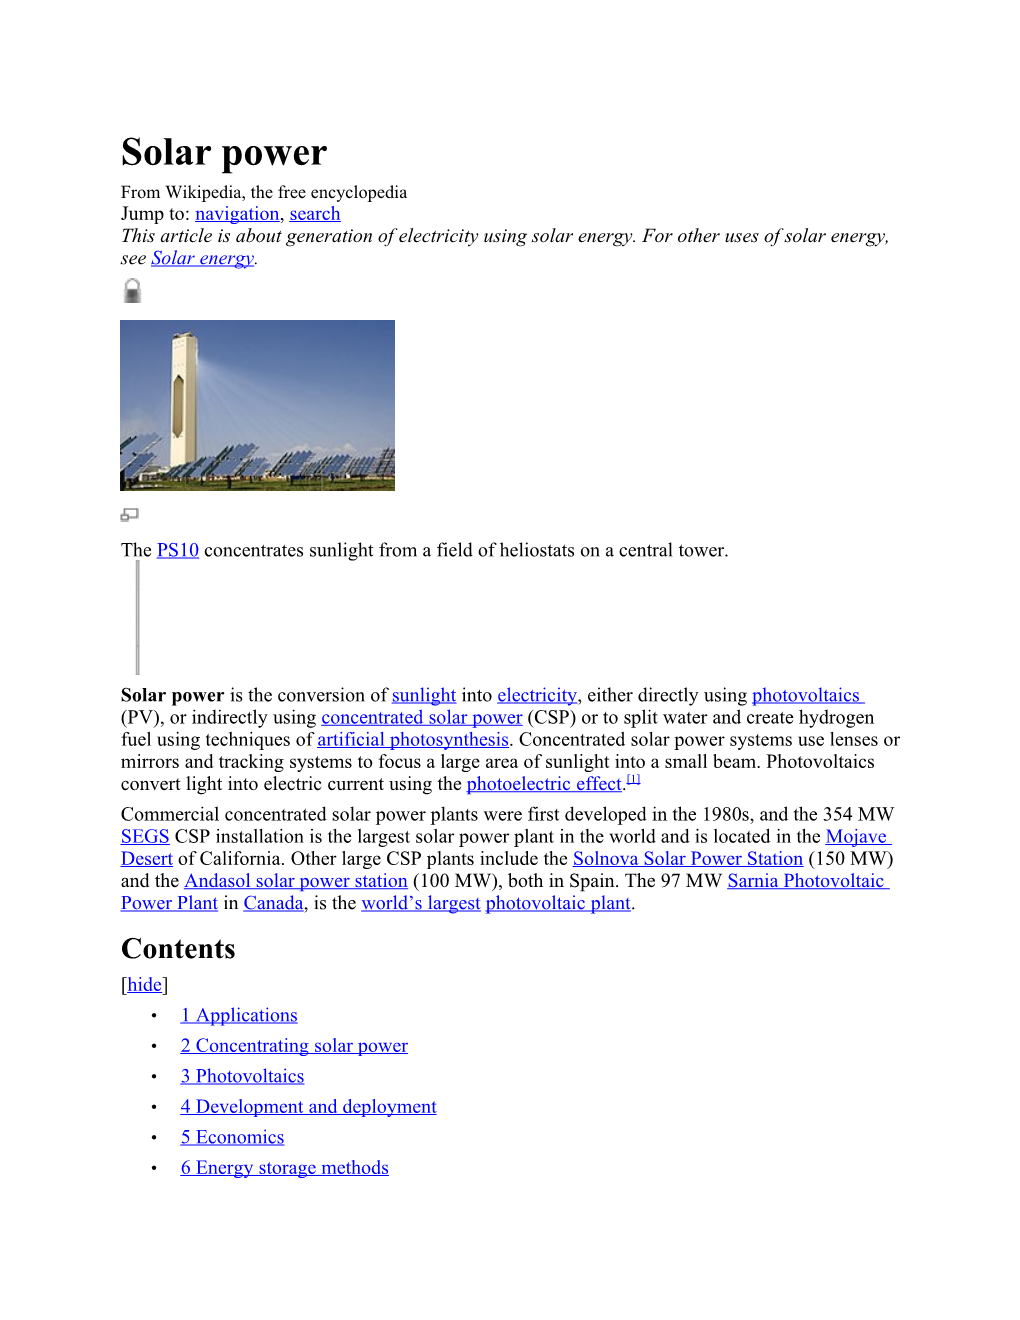 Solar Power from Wikipedia, the Free Encyclopedia Jump To: Navigation, Search This Article Is About Generation of Electricity Using Solar Energy